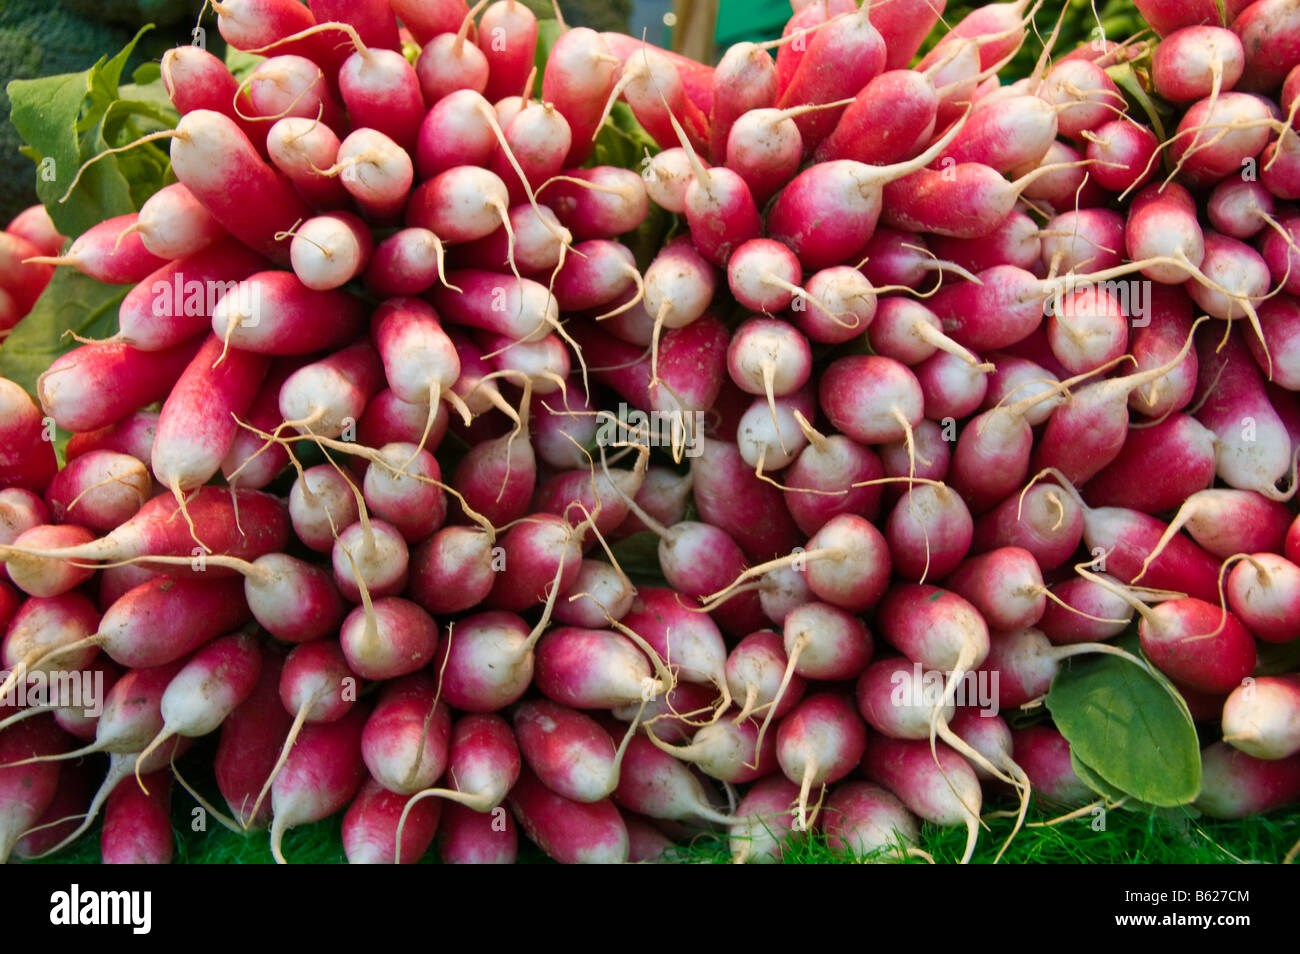 Radishes on sale at the covered market of Niort Deux Sèvres France Stock Photo